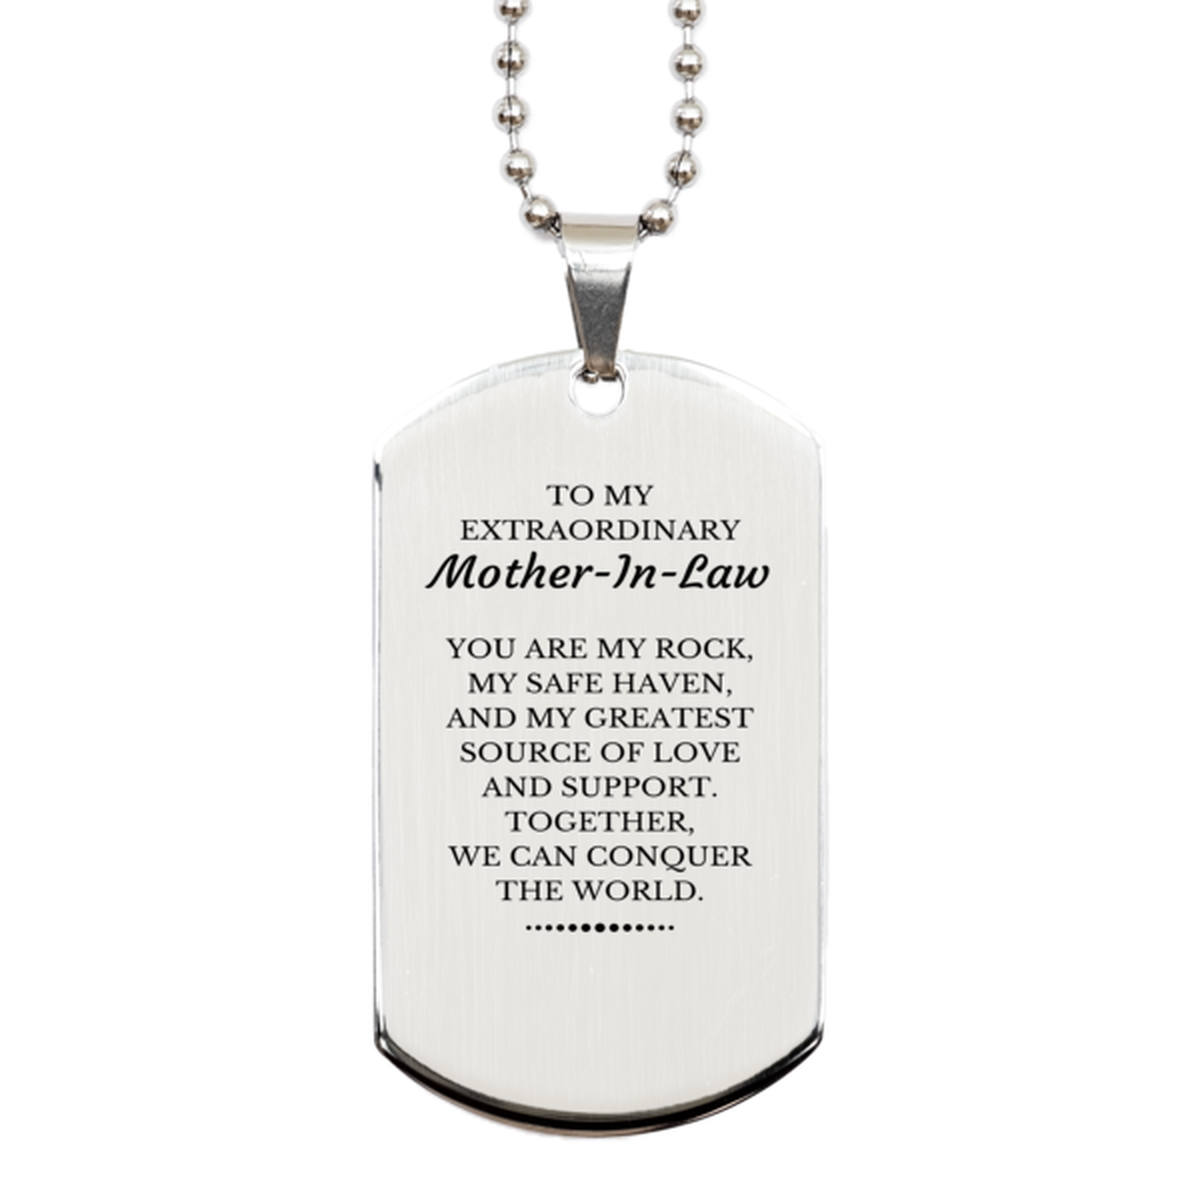 To My Extraordinary Mother-In-Law Gifts, Together, we can conquer the world, Birthday Silver Dog Tag For Mother-In-Law, Christmas Gifts For Mother-In-Law